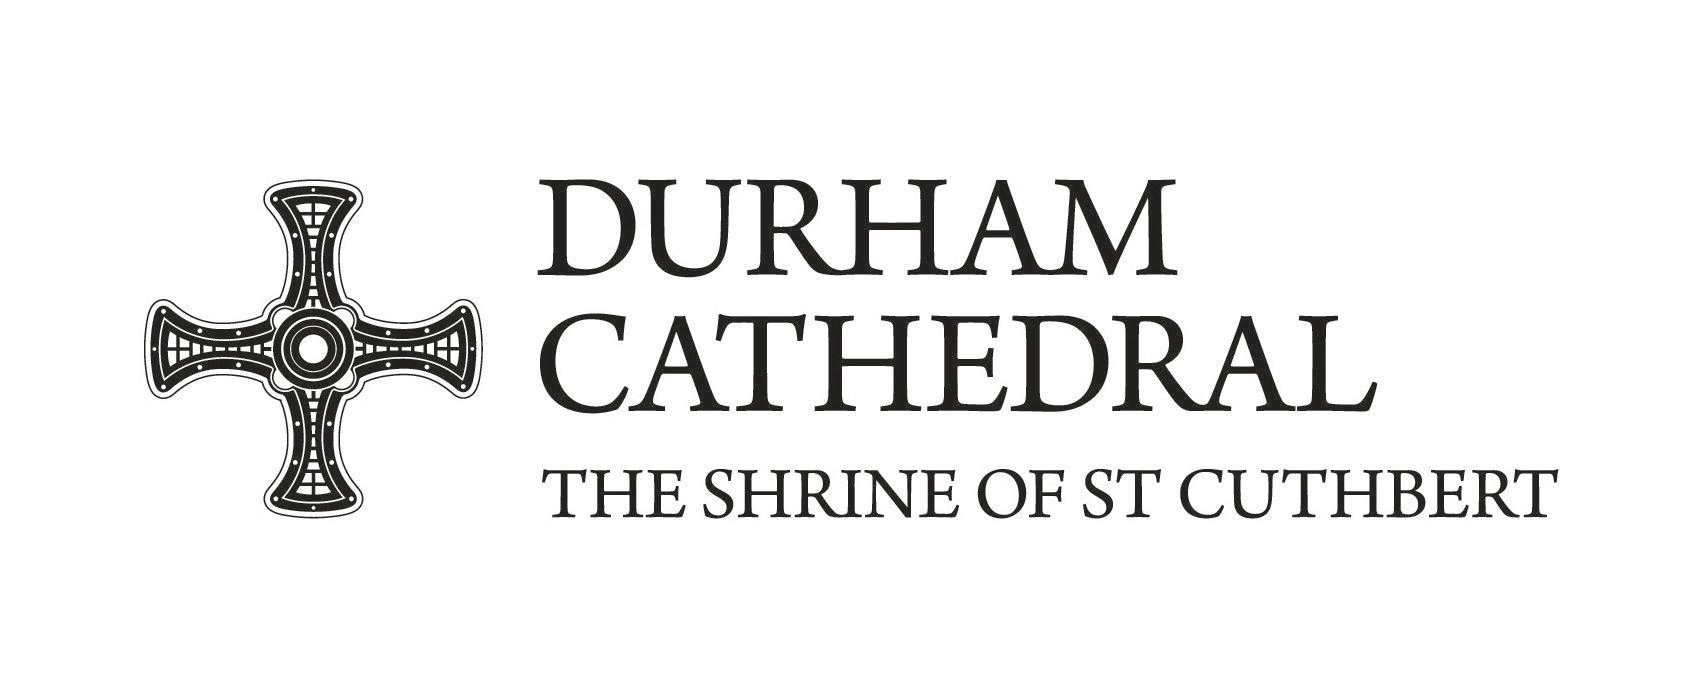 Cathedral Logo - Durham Cathedral